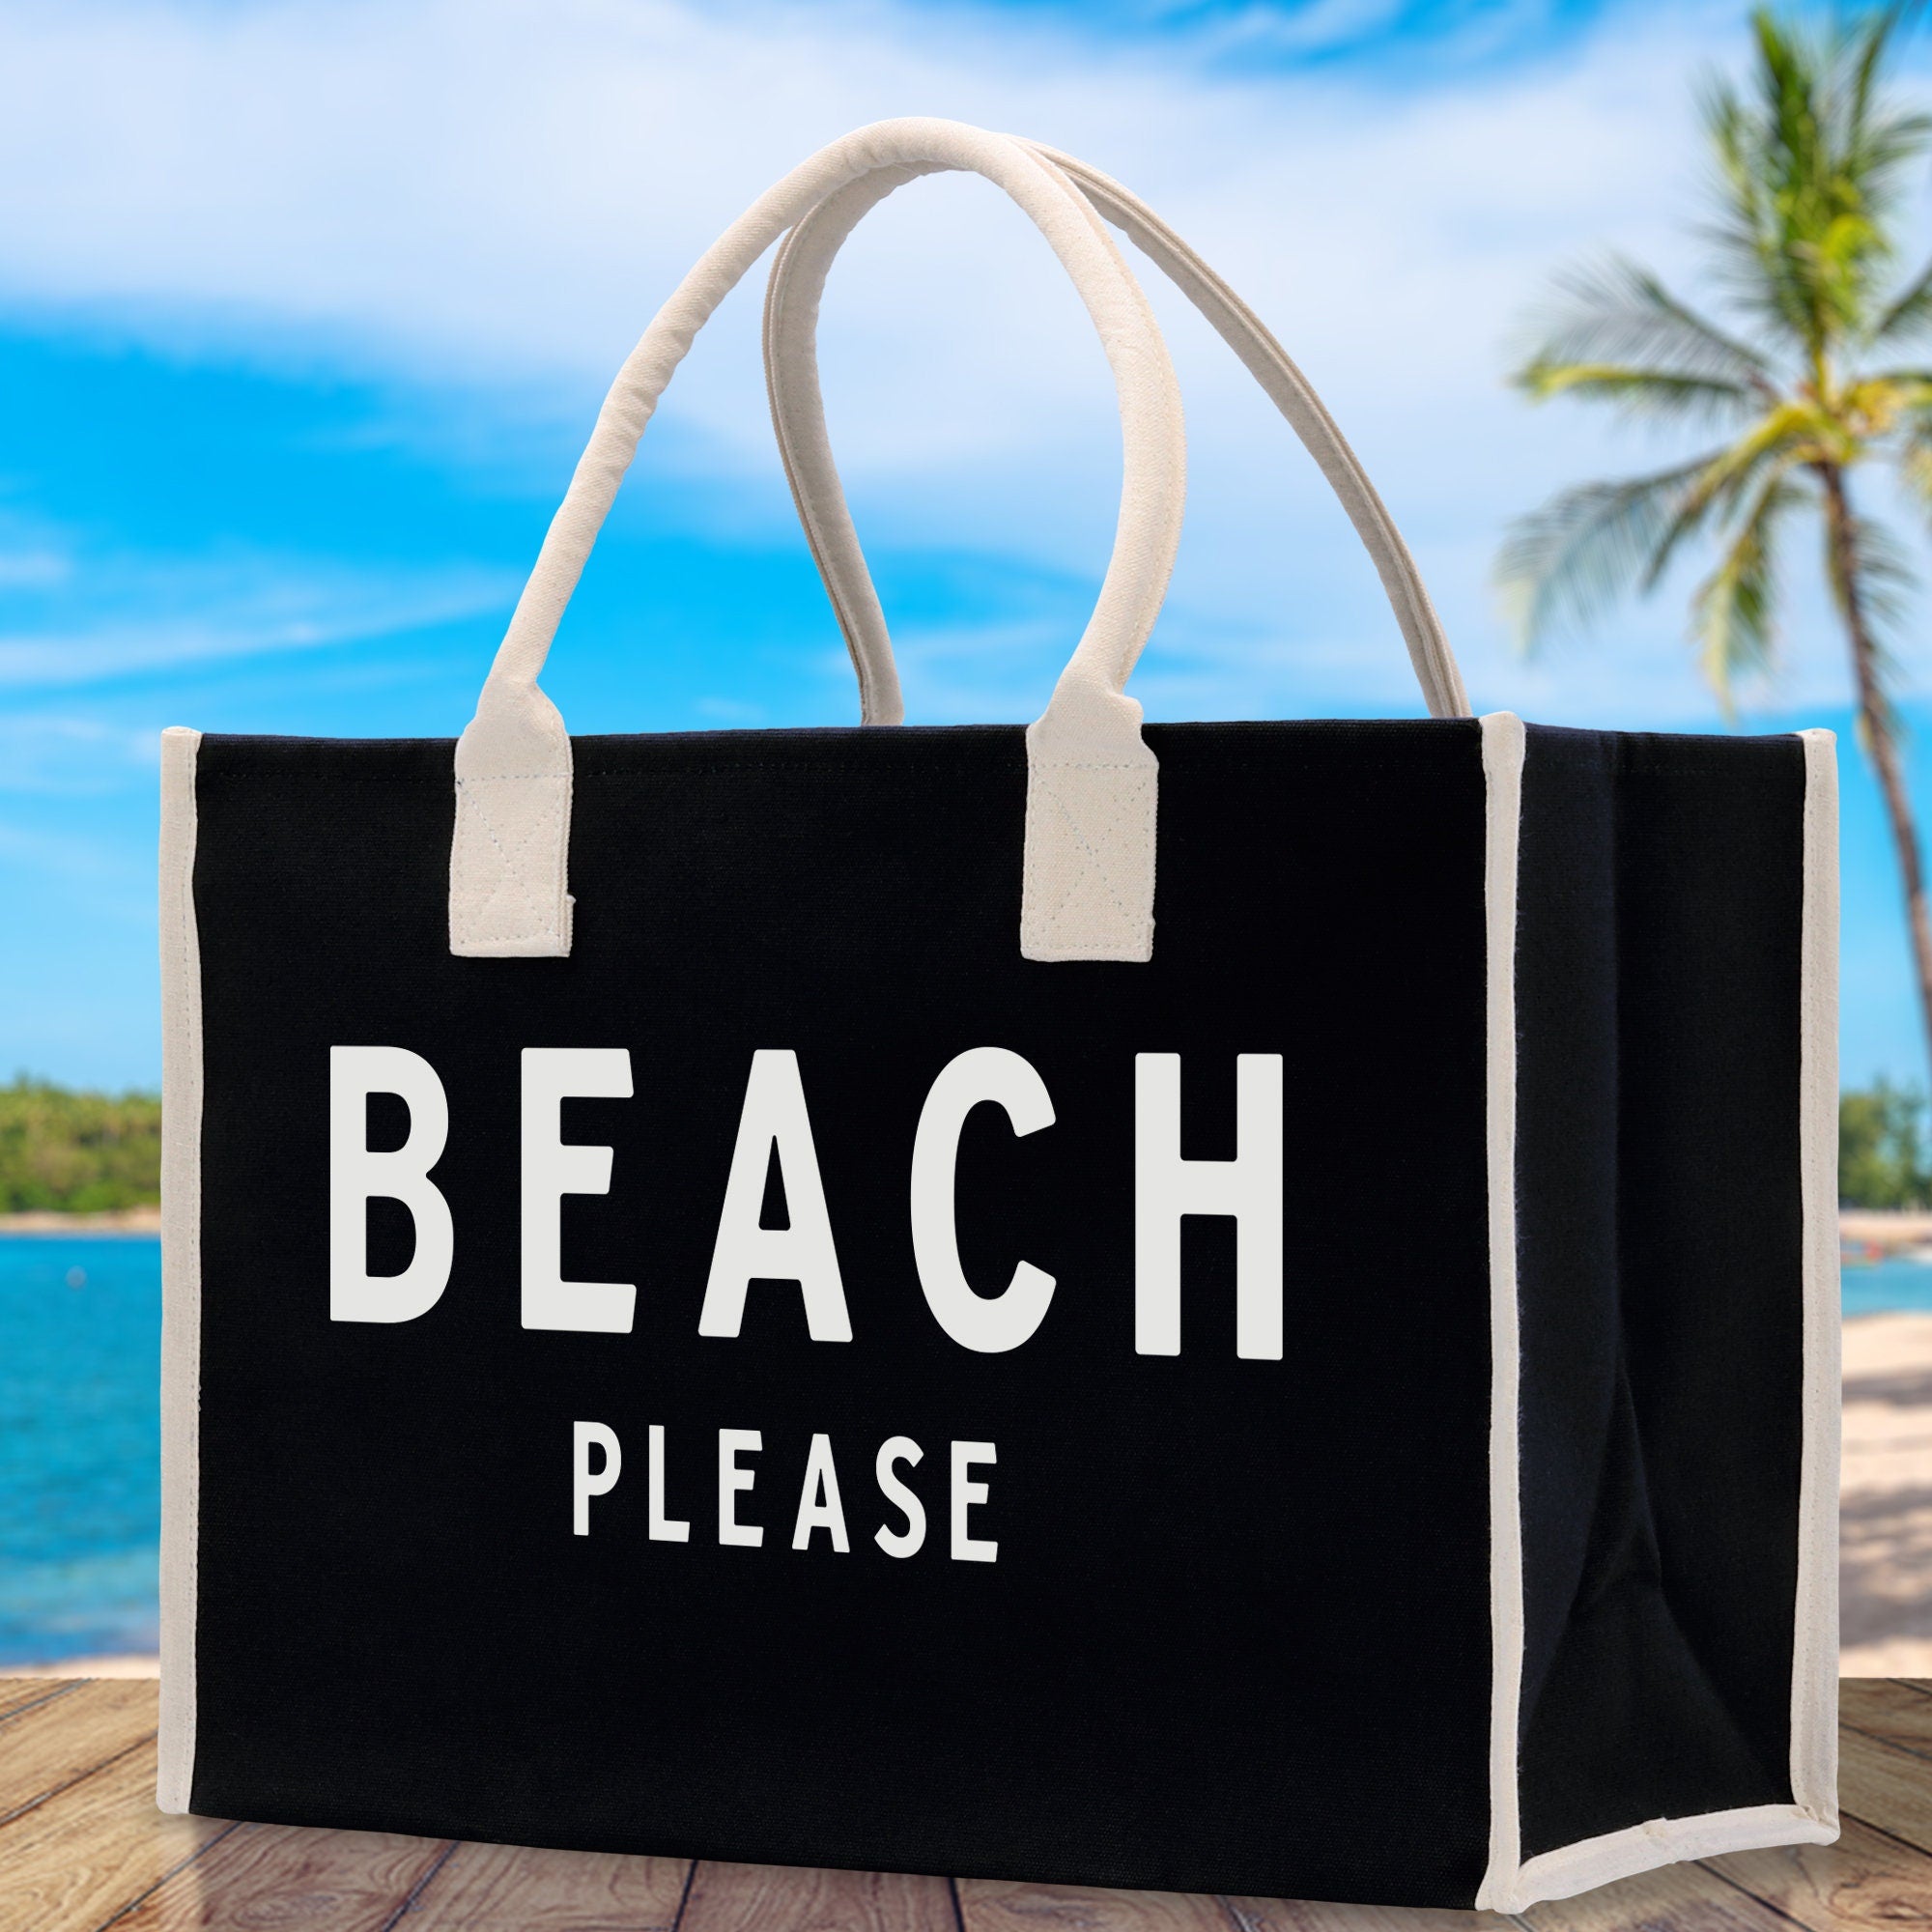 Beach Please Cotton Canvas Chic Beach Tote Bag Multipurpose Tote Weekender Tote Gift for Her Outdoor Tote Vacation Tote Large Beach Bag